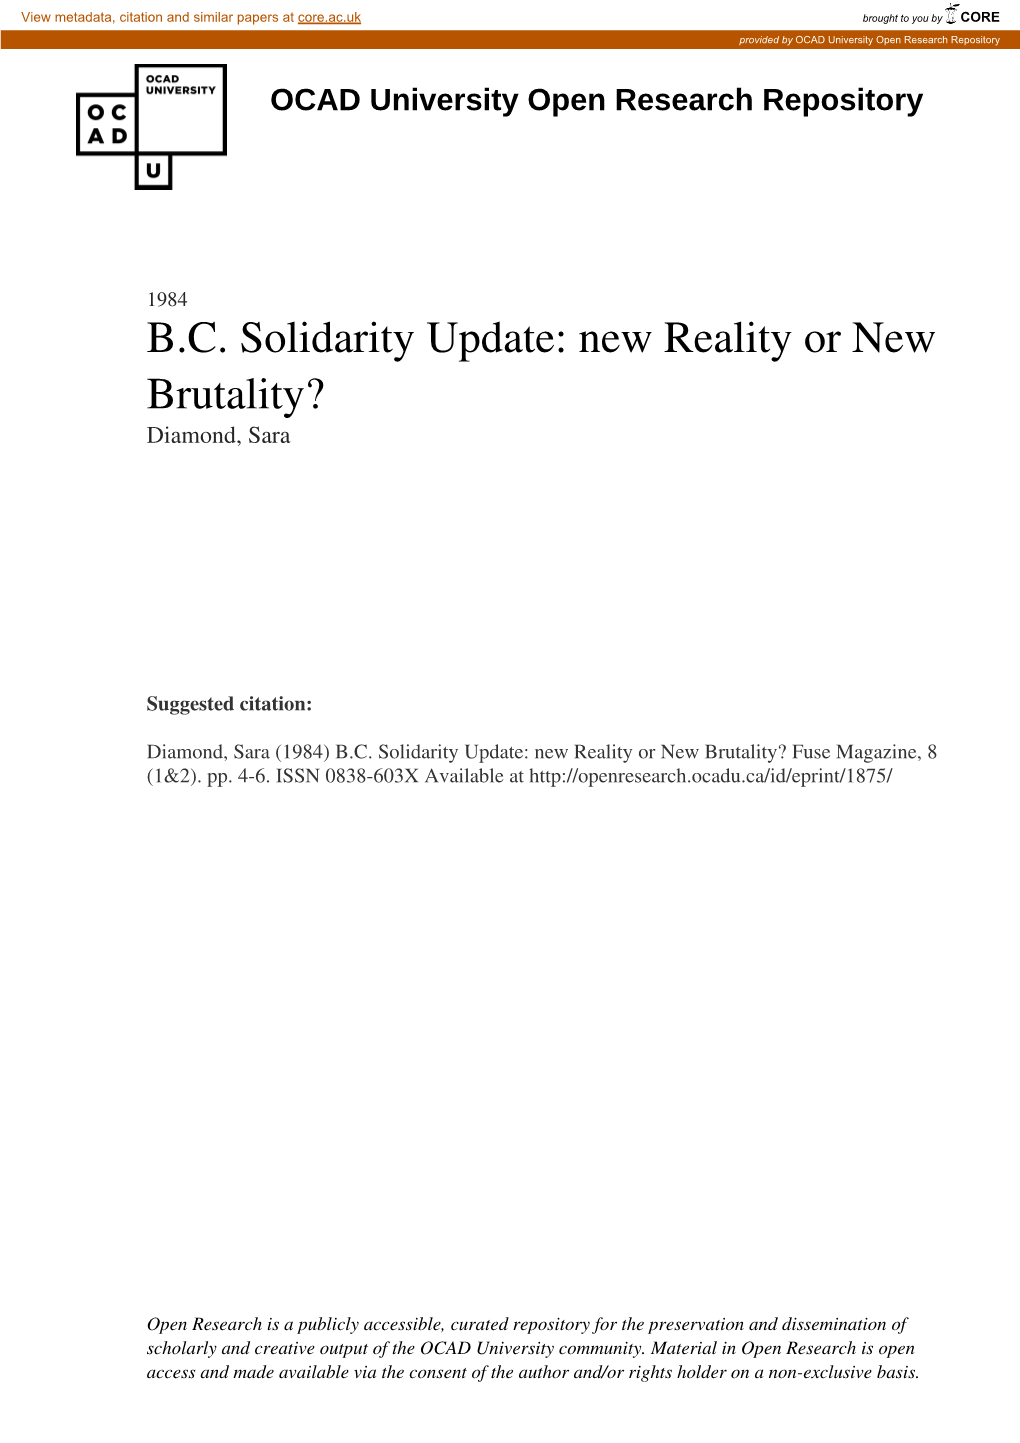 BC Solidarity Update: New Reality Or New Brutality?